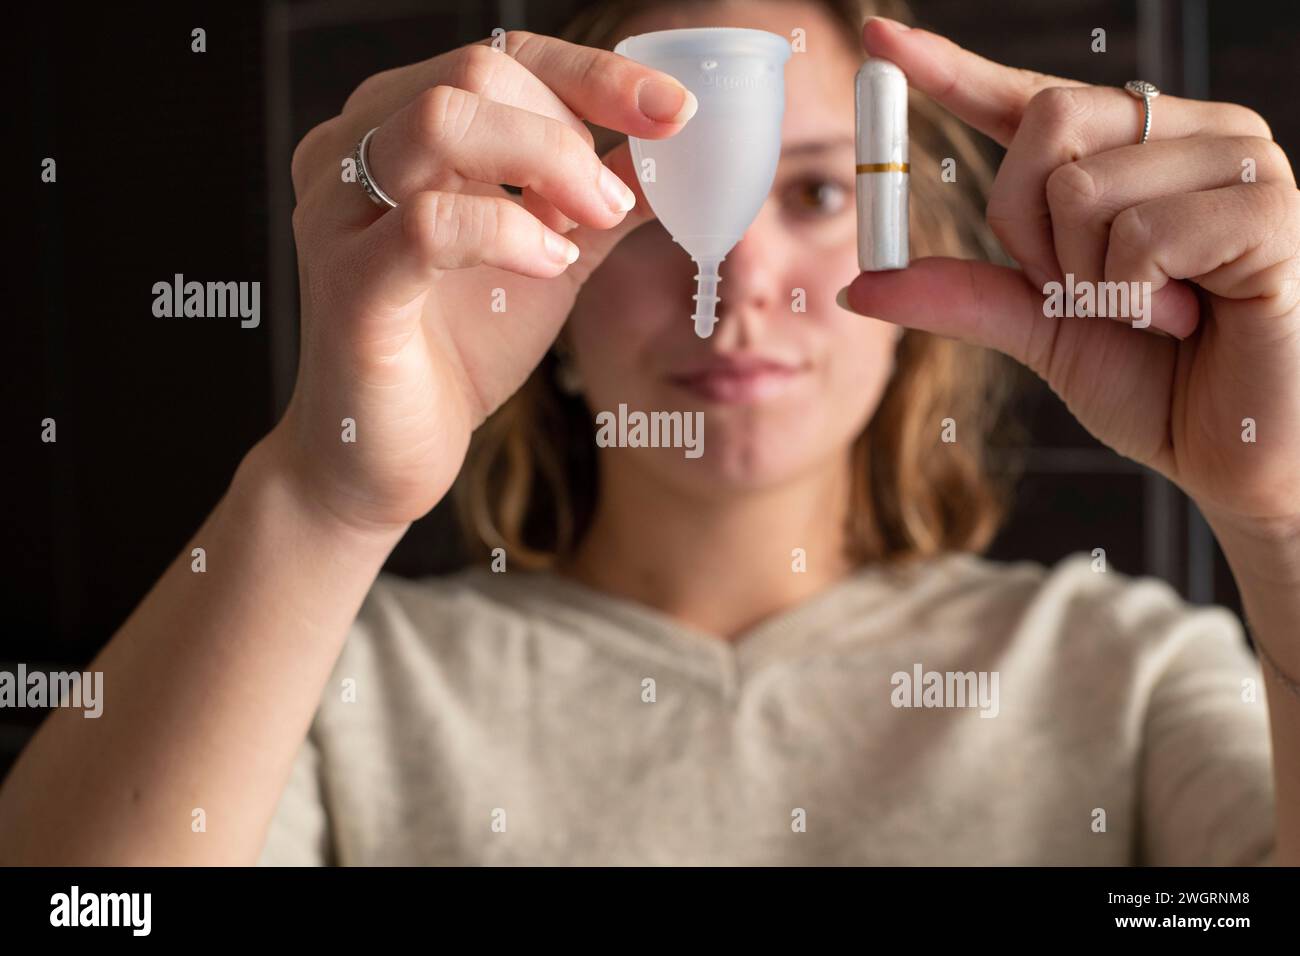 Woman holding her monthly menstruation health products, cup and tampon Stock Photo